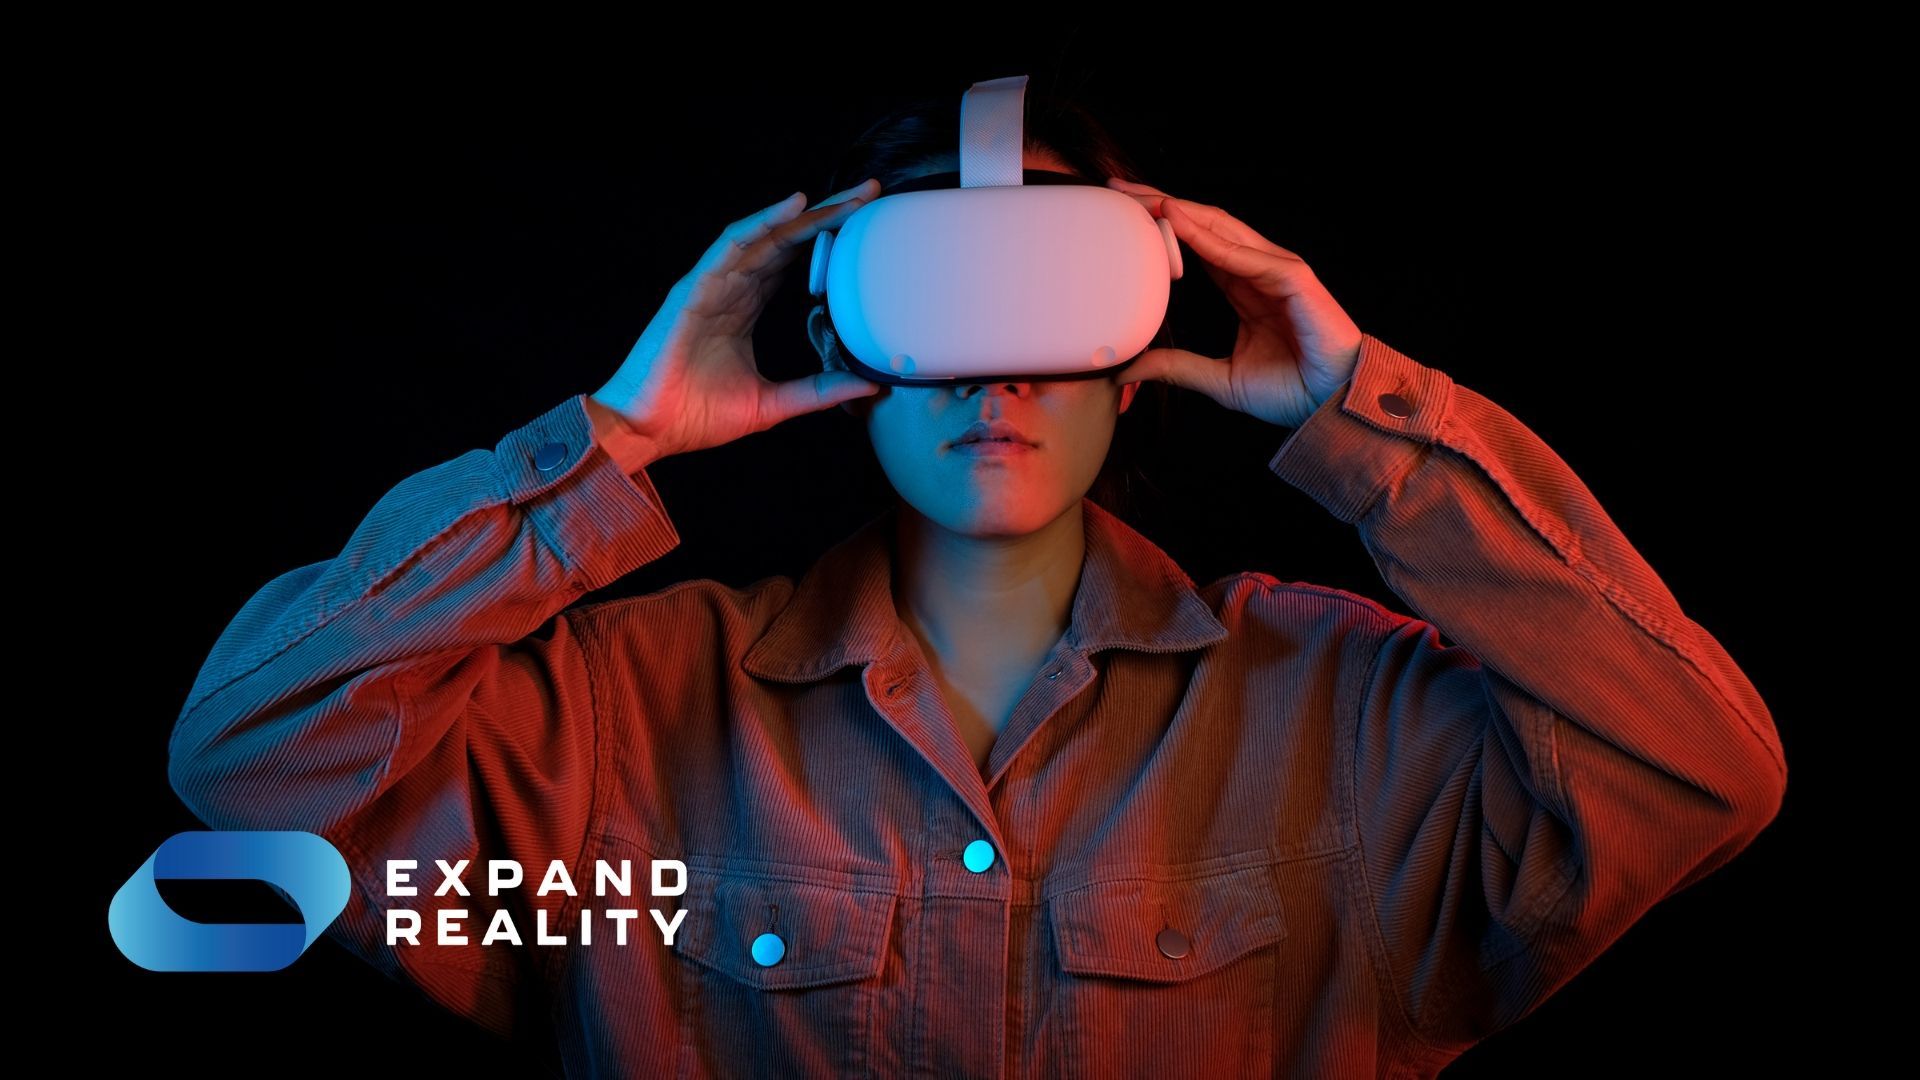 Stepping into the shoes of the consumer? Discover the latest players in the Metaverse with Expand Reality's curated list of popular metaverses.